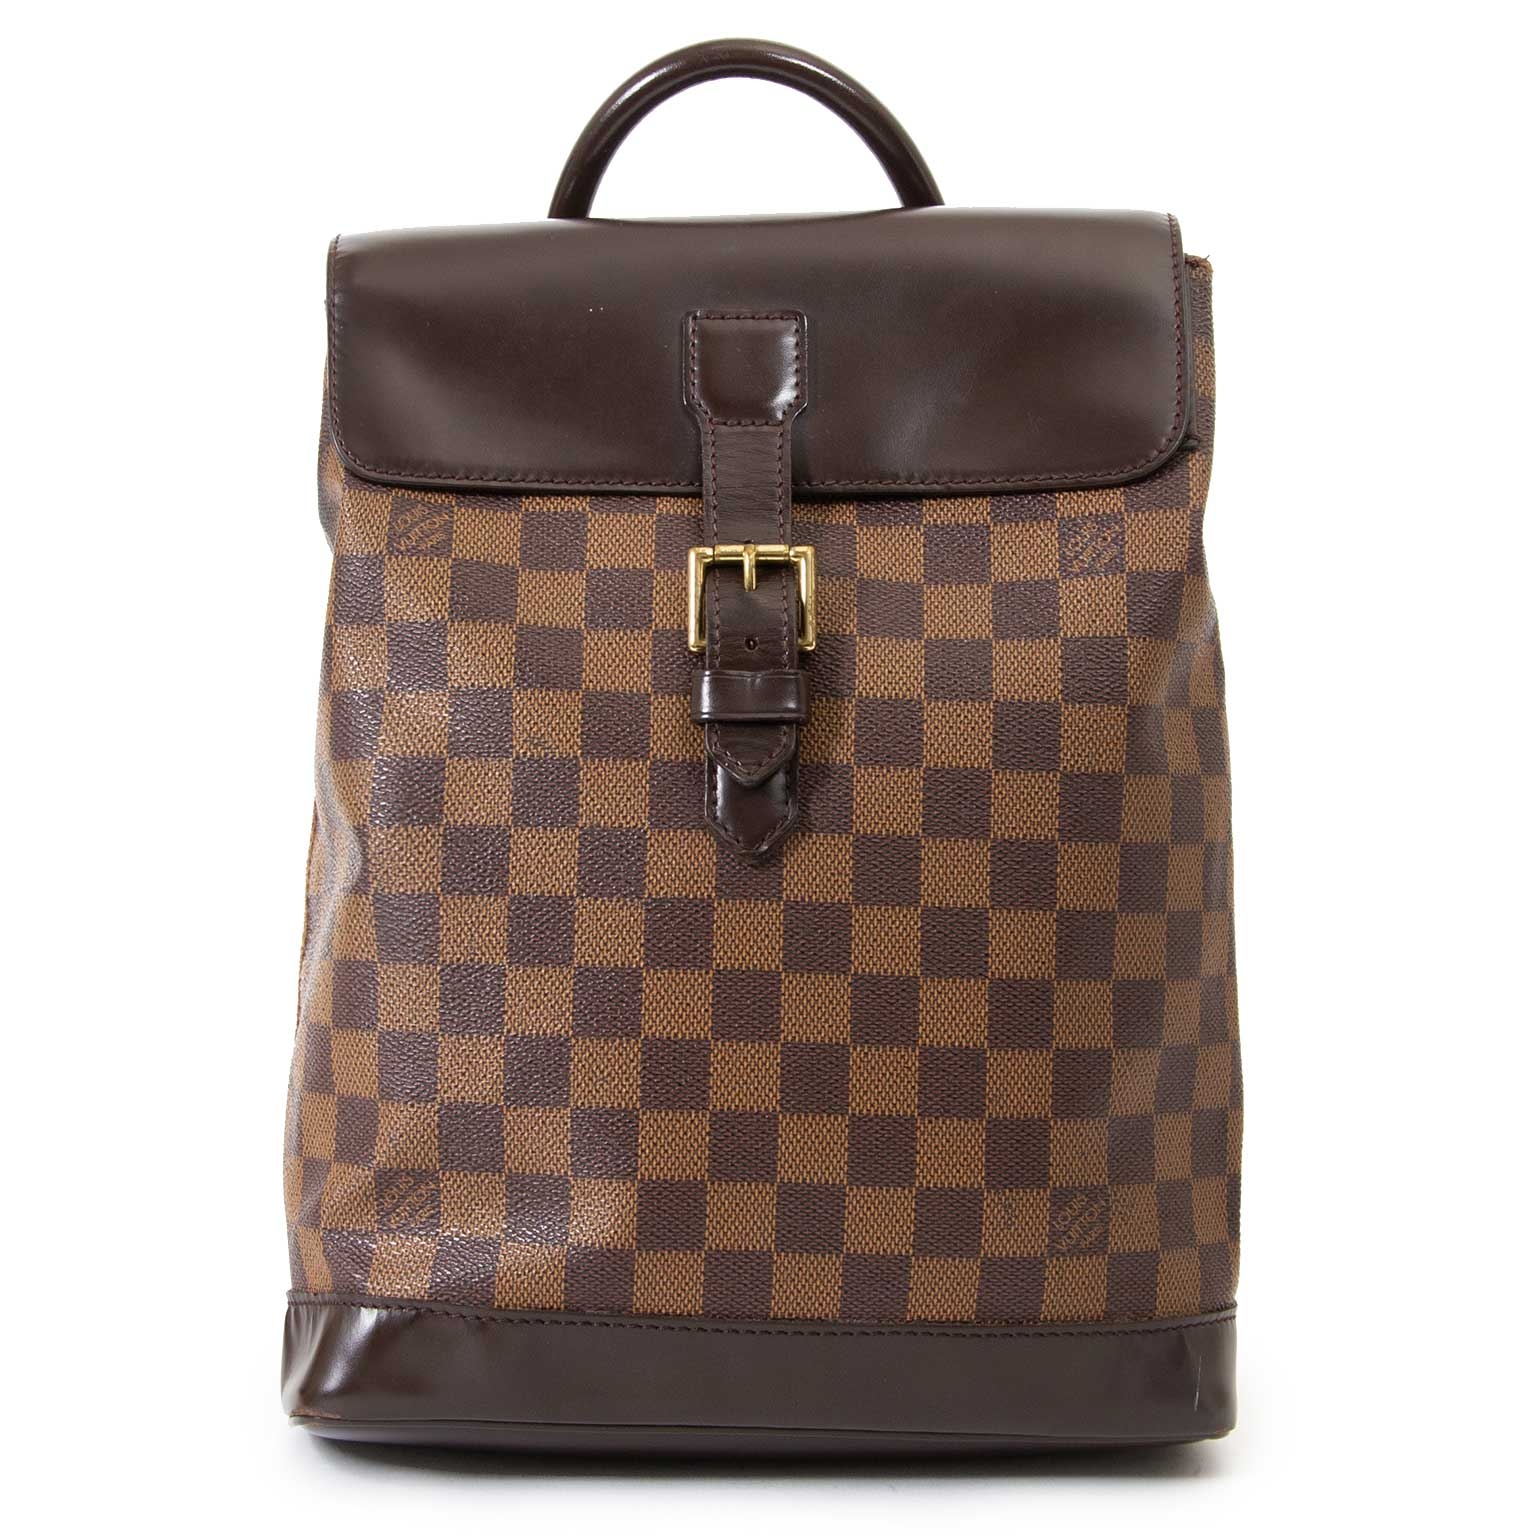 Louis Vuitton lv woman small backpack Damier ebene  Louis vuitton handbags  crossbody Louis vuitton handbags speedy Louis vuitton handbags